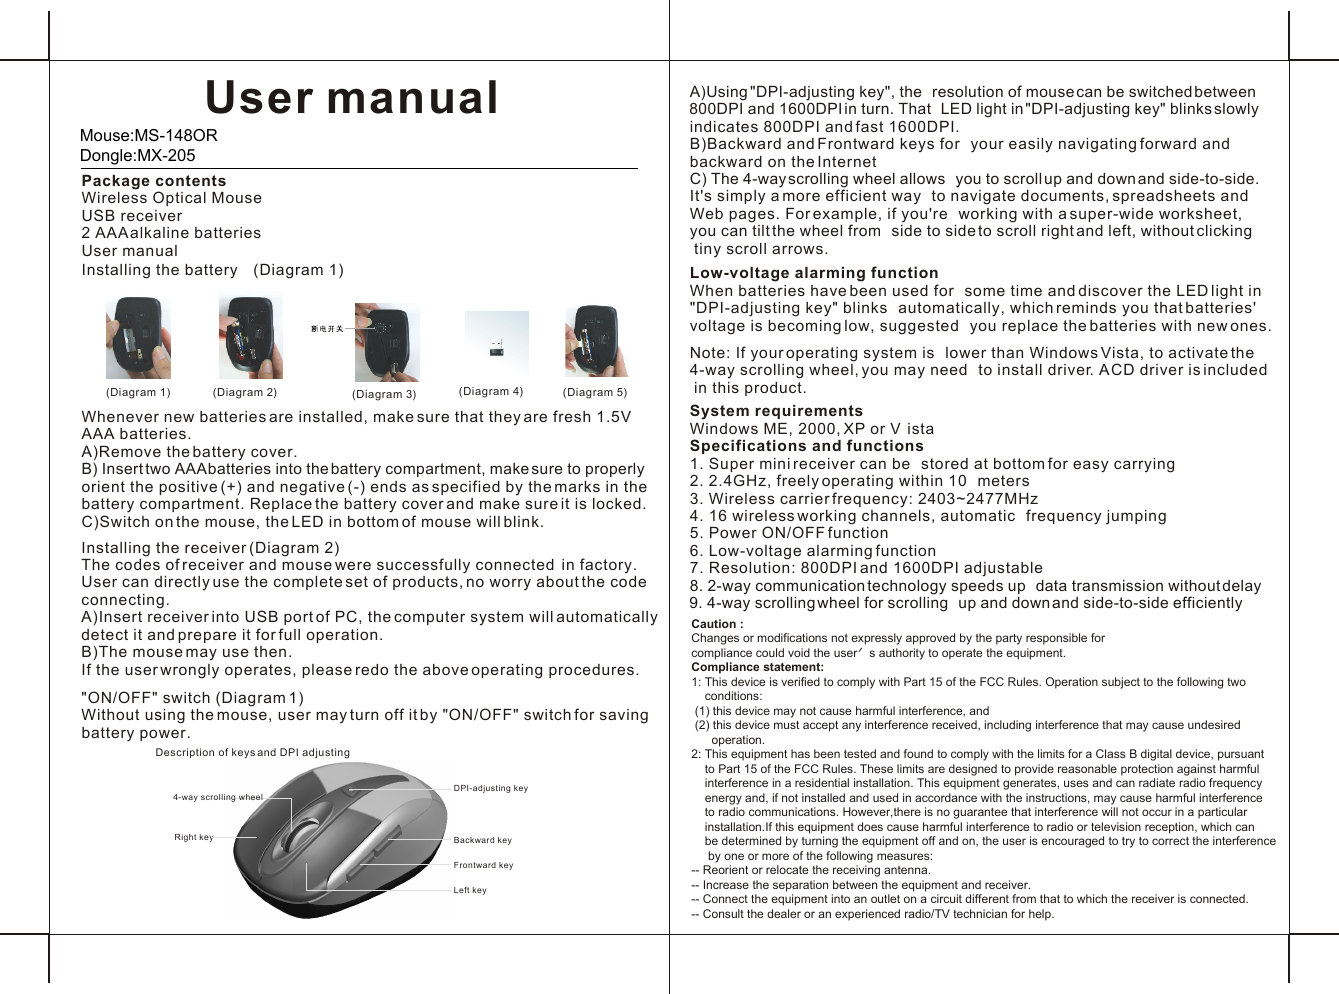 User manual Package contentsWireless Optical MouseUSB receiver2 AAA alkaline batteriesUser manual Installing the battery  (Diagram 1)Caution : Changes or modifications not expressly approved by the party responsible for compliance could void the user＇s authority to operate the equipment.Compliance statement:1: This device is verified to comply with Part 15 of the FCC Rules. Operation subject to the following two     conditions: (1) this device may not cause harmful interference, and  (2) this device must accept any interference received, including interference that may cause undesired       operation.2: This equipment has been tested and found to comply with the limits for a Class B digital device, pursuant     to Part 15 of the FCC Rules. These limits are designed to provide reasonable protection against harmful     interference in a residential installation. This equipment generates, uses and can radiate radio frequency     energy and, if not installed and used in accordance with the instructions, may cause harmful interference     to radio communications. However,there is no guarantee that interference will not occur in a particular     installation.If this equipment does cause harmful interference to radio or television reception, which can     be determined by turning the equipment off and on, the user is encouraged to try to correct the interference      by one or more of the following measures:-- Reorient or relocate the receiving antenna.-- Increase the separation between the equipment and receiver.-- Connect the equipment into an outlet on a circuit different from that to which the receiver is connected.-- Consult the dealer or an experienced radio/TV technician for help.Whenever new batteries are installed, make sure that they are fresh 1.5V AAA batteries.A)Remove the battery cover.B) Insert two AAA batteries into the battery compartment, make sure to properly orient the positive (+) and negative (-) ends as specified by the marks in the battery compartment. Replace the battery cover and make sure it is locked.C)Switch on the mouse, the LED in bottom of mouse will blink.Installing the receiver (Diagram 2)The codes of receiver and mouse were successfully connected  in factory. User can directly use the complete set of products, no worry about the code connecting. A)Insert receiver into USB port of PC, the computer system will automatically detect it and prepare it for full operation.B)The mouse may use then.If the user wrongly operates, please redo the above operating procedures.&quot;ON/OFF&quot; switch (Diagram 1)Without using the mouse, user may turn off it by &quot;ON/OFF&quot; switch for saving battery power.A)Using &quot;DPI-adjusting key&quot;, the  resolution of mouse can be switched between 800DPI and 1600DPI in turn. That  LED light in &quot;DPI-adjusting key&quot; blinks slowlyindicates 800DPI and fast 1600DPI. B)Backward and Frontward keys for  your easily navigating forward and backward on the InternetC) The 4-way scrolling wheel allows  you to scroll up and down and side-to-side. It&apos;s simply a more efficient way  to navigate documents, spreadsheets and Web pages. For example, if you&apos;re  working with a super-wide worksheet, you can tilt the wheel from  side to side to scroll right and left, without clicking tiny scroll arrows.  Low-voltage alarming functionWhen batteries have been used for  some time and discover the LED light in &quot;DPI-adjusting key&quot; blinks  automatically, which reminds you that batteries&apos; voltage is becoming low, suggested  you replace the batteries with new ones.Note: If your operating system is  lower than Windows Vista, to activate the 4-way scrolling wheel, you may need  to install driver. A CD driver is included in this product. System requirementsWindows ME, 2000, XP or V istaSpecifications and functions1. Super mini receiver can be  stored at bottom for easy carrying2. 2.4GHz, freely operating within 10  meters3. Wireless carrier frequency: 2403~2477MHz 4. 16 wireless working channels, automatic  frequency jumping5. Power ON/OFF function6. Low-voltage alarming function7. Resolution: 800DPI and 1600DPI adjustable8. 2-way communication technology speeds up  data transmission without delay9. 4-way scrolling wheel for scrolling  up and down and side-to-side efficiently( )Diagram 2( )Diagram 1 ( )Diagram 4( )Diagram 3Description of keys and DPI adjustingFrontward keyBackward key4-way scrolling wheelDPI-adjusting keyRight keyLeft key( )Diagram 5Mouse:MS-148OR Dongle:MX-205